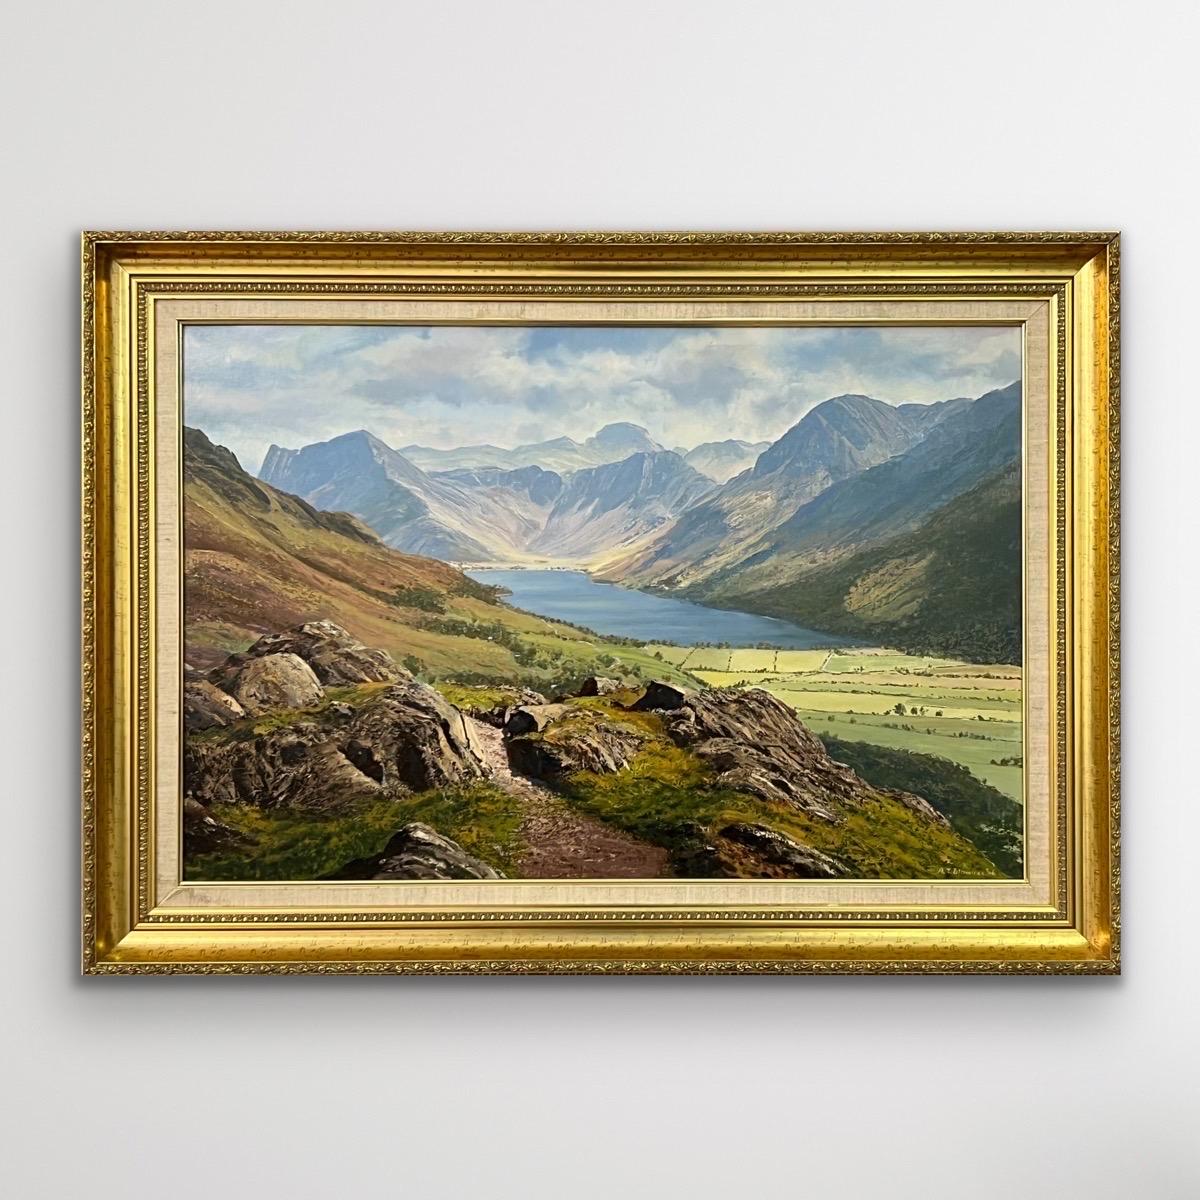 Great Gable & Buttermere in English Lake District by 20th Century British Artist - Painting by Arthur Terry Blamires